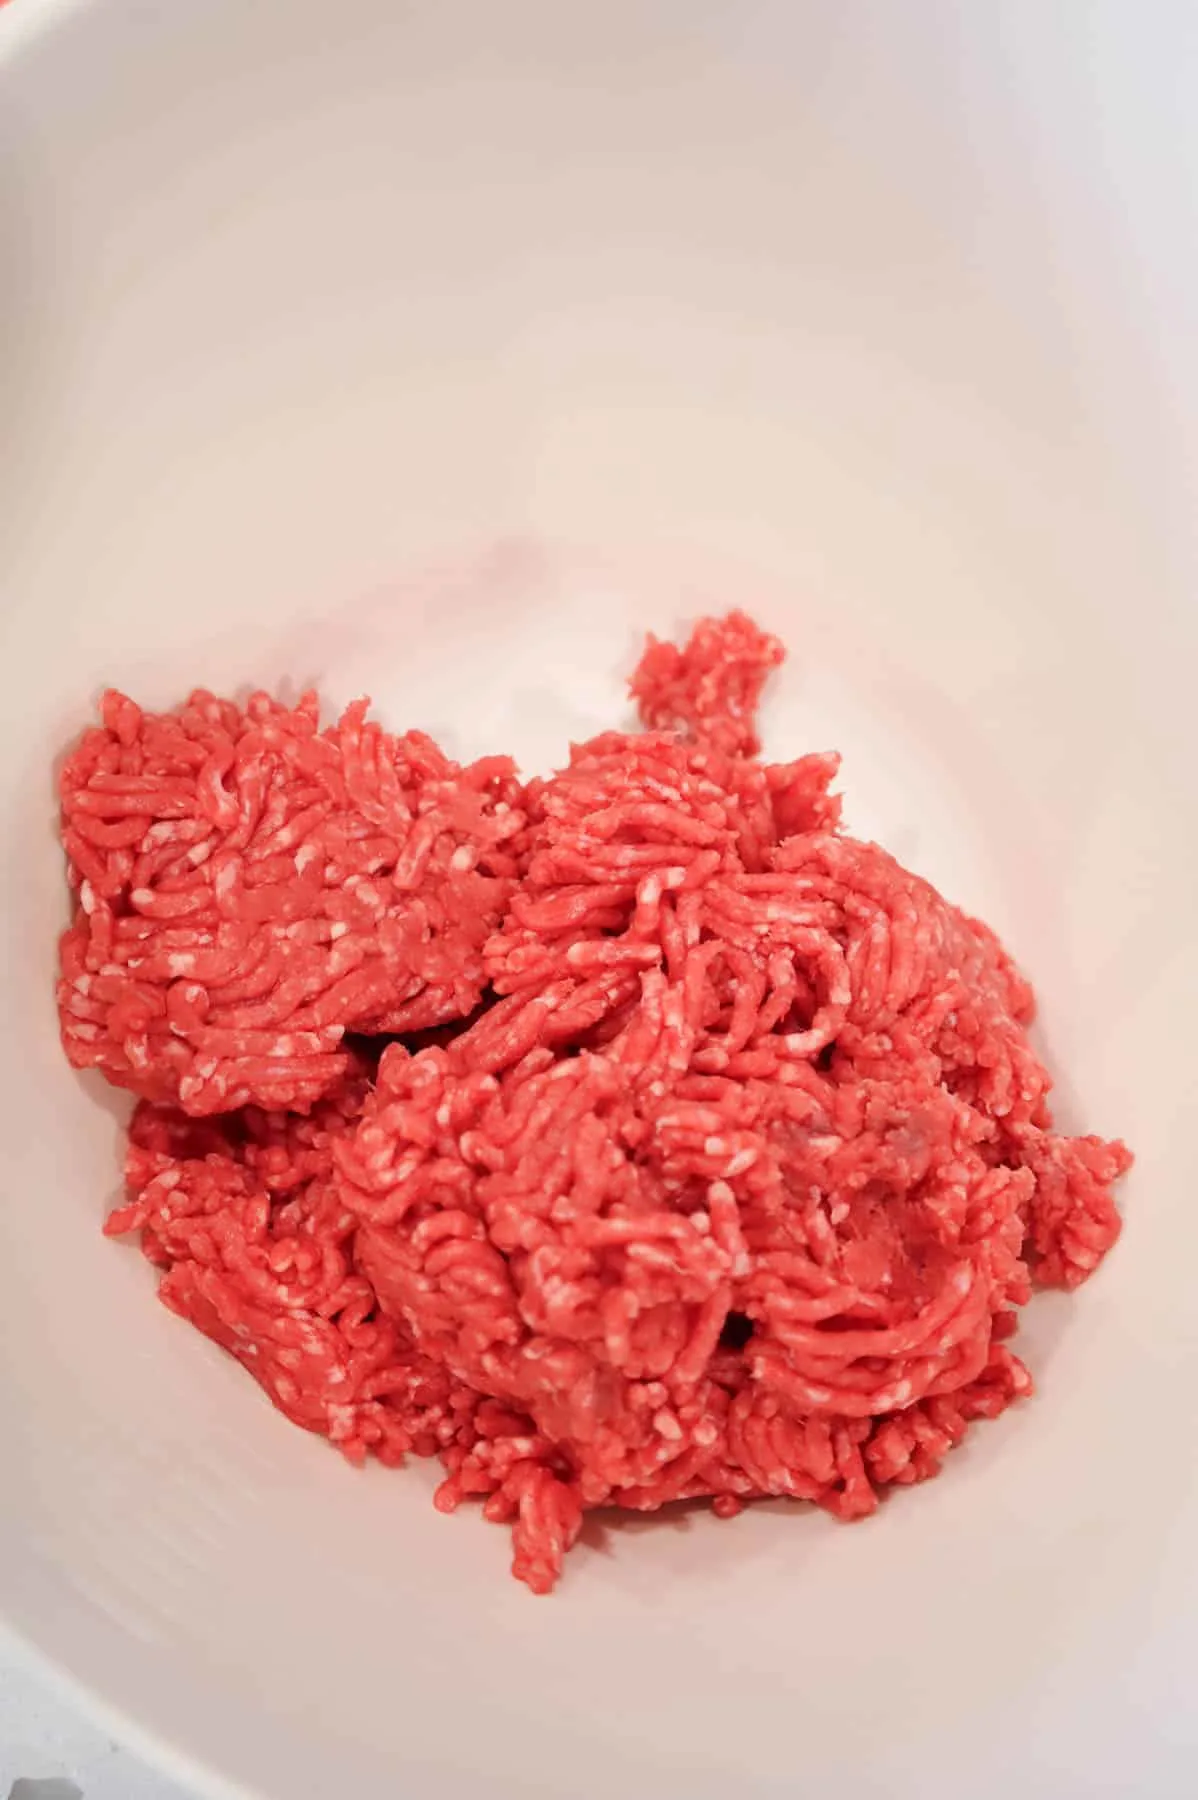 raw ground beef in a bowl